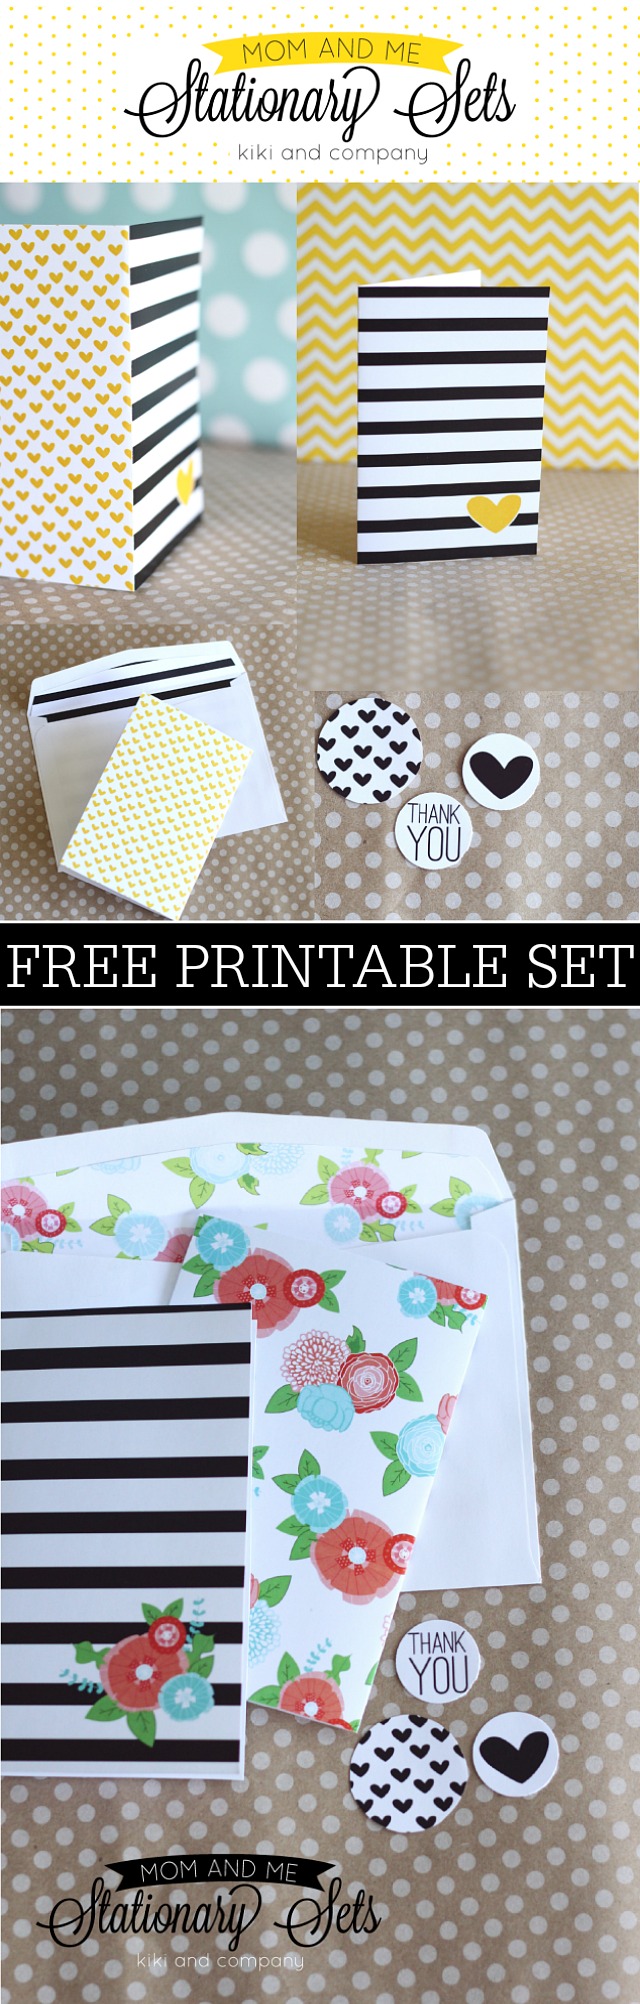 Free Mom and Me Stationary Sets from Kiki and Company. Flowers and Stripes.